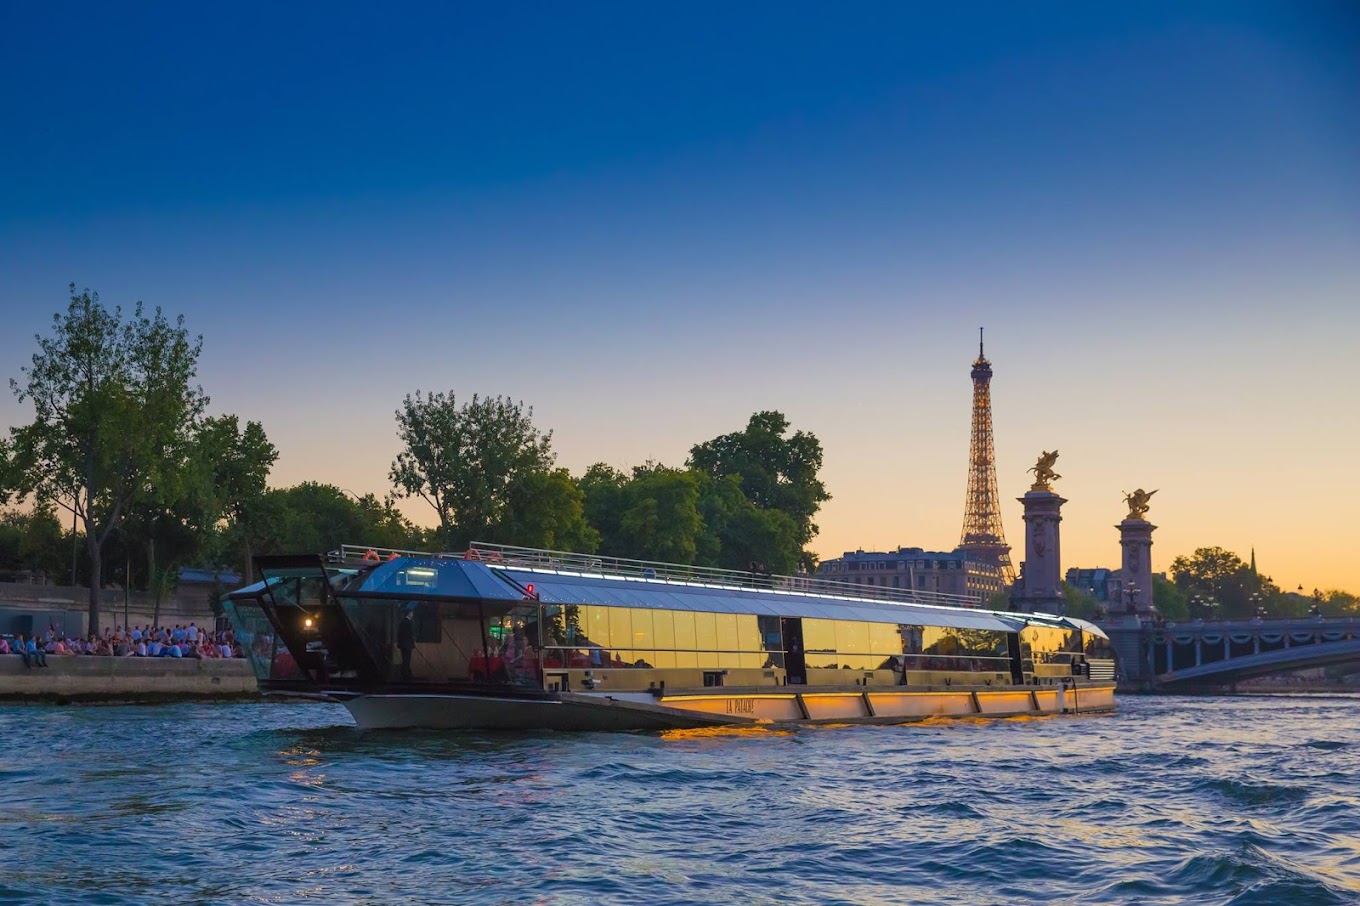 Bateaux Mouches is an elegant Dinner Cruise